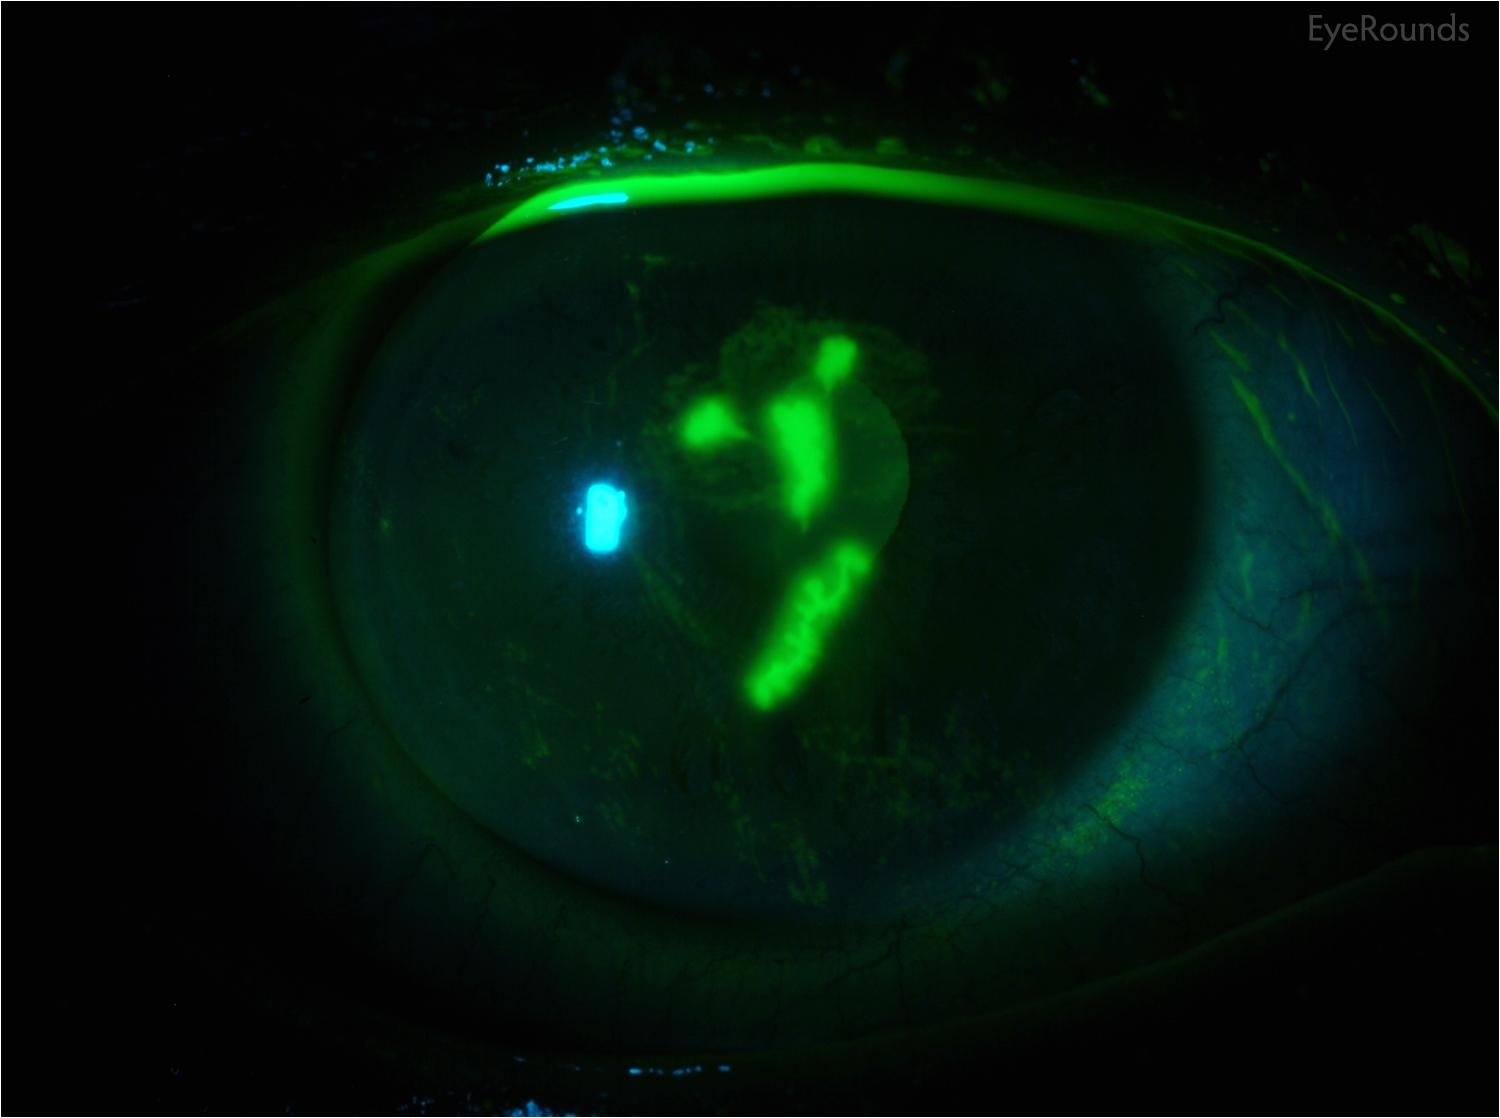 slit lamp photo classic epithelial dendrites after fluorescein staining